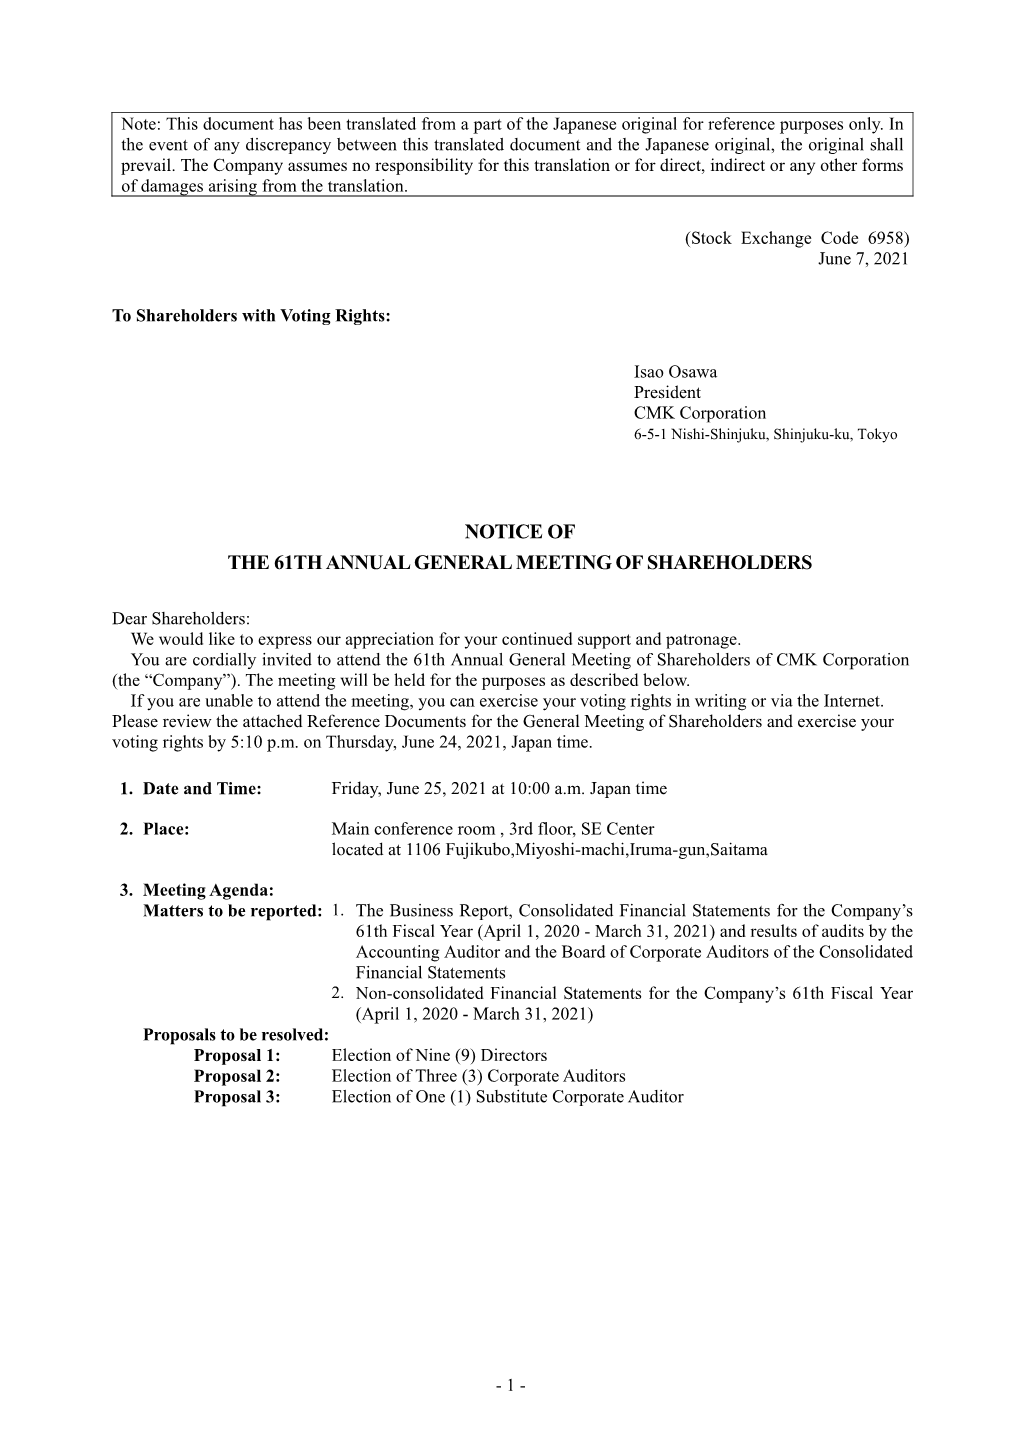 Notice of the 61Th Annual General Meeting of Shareholders